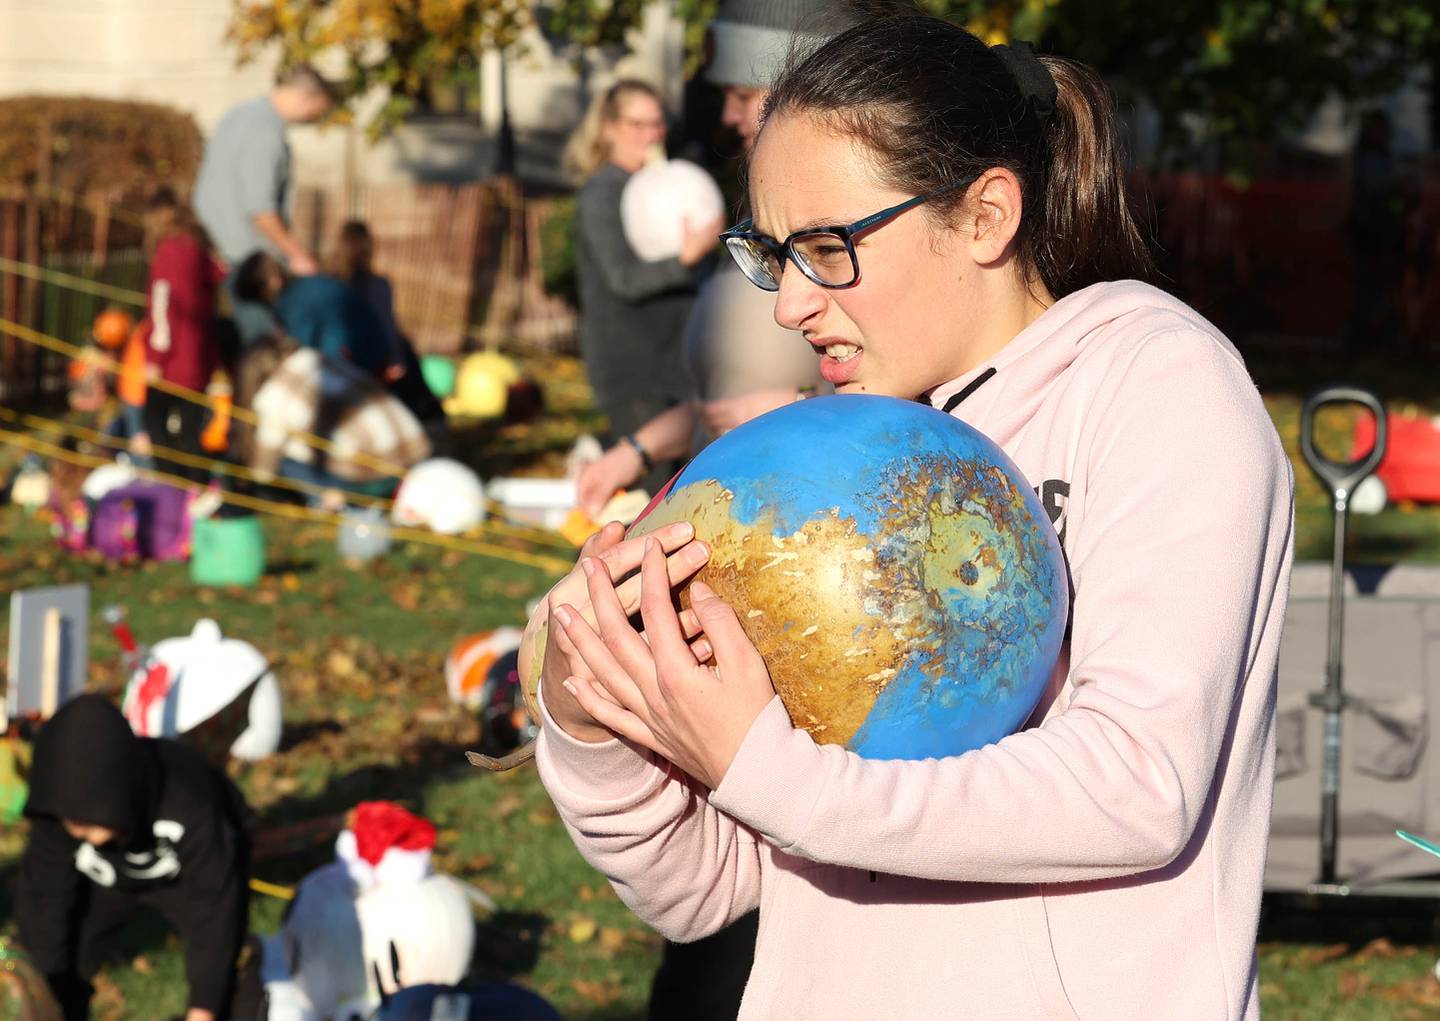 Bronwyn Butler, 12, from Sycamore totes her heavy pumpkin into the pumpkin display area Wednesday, Oct.26, 2022 on the DeKalb County Courthouse lawn during the first day of the Sycamore Pumpkin Festival.